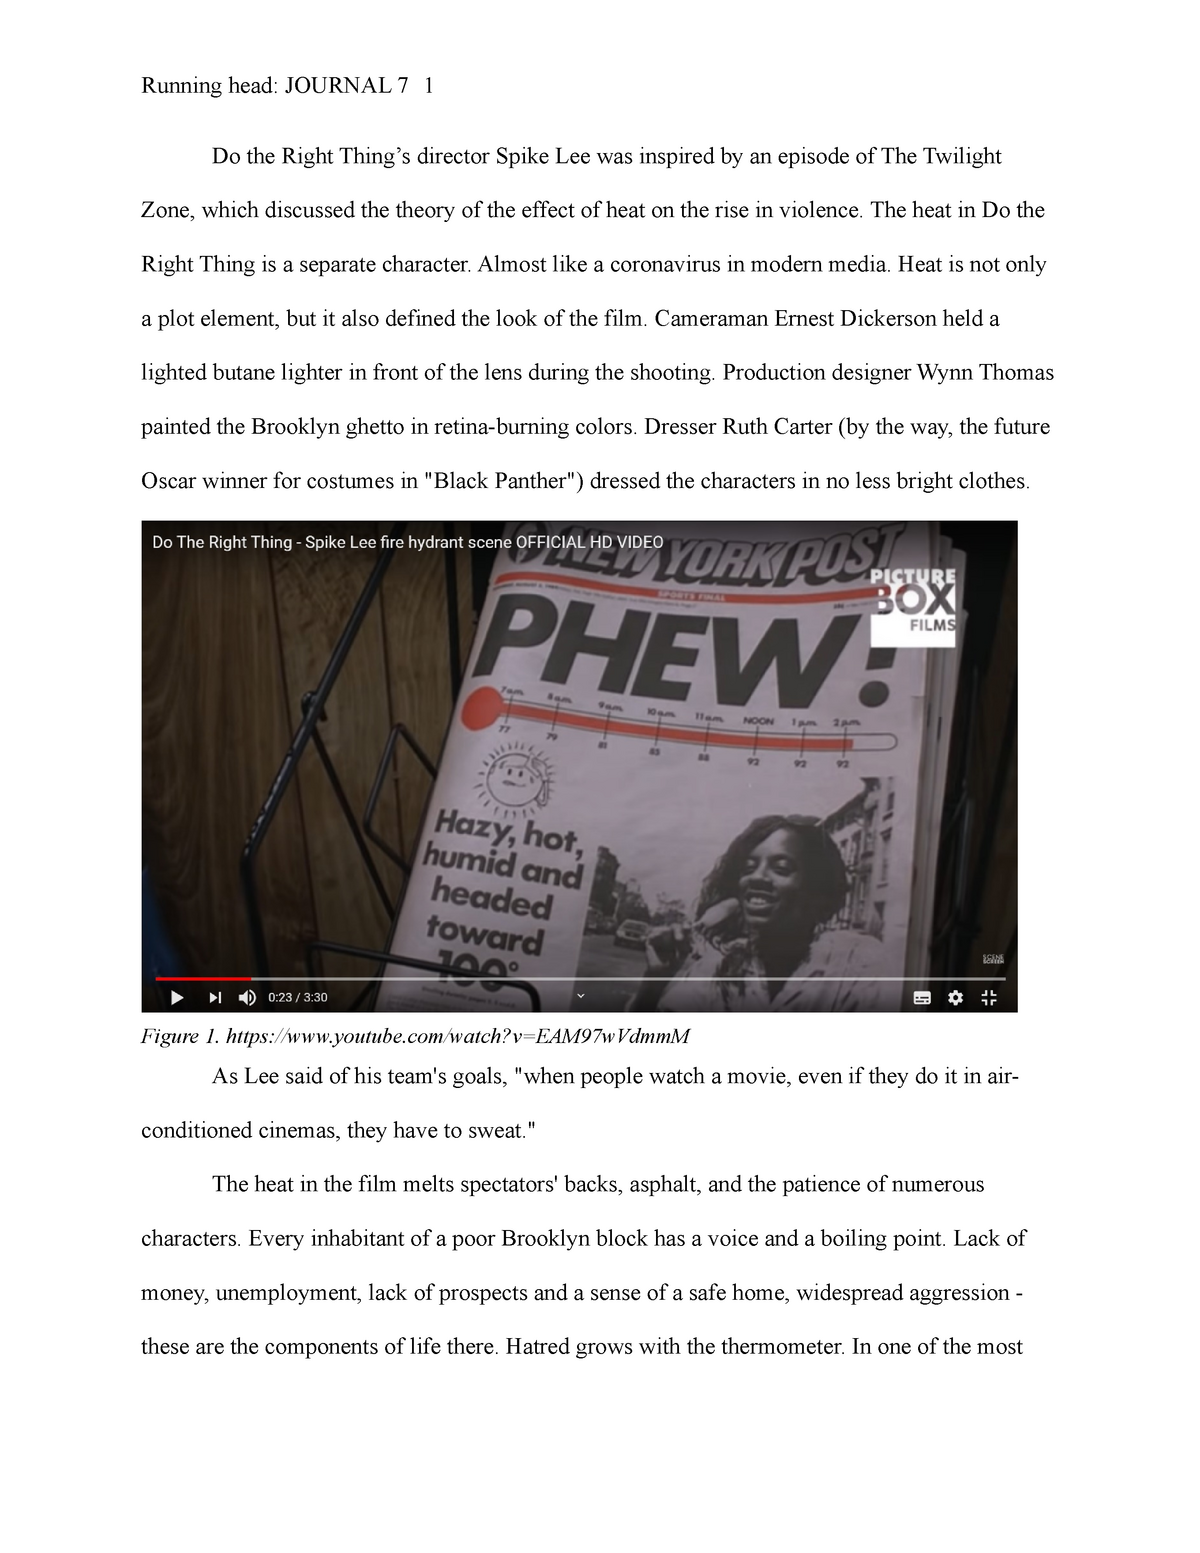 spike lee do the right thing essay